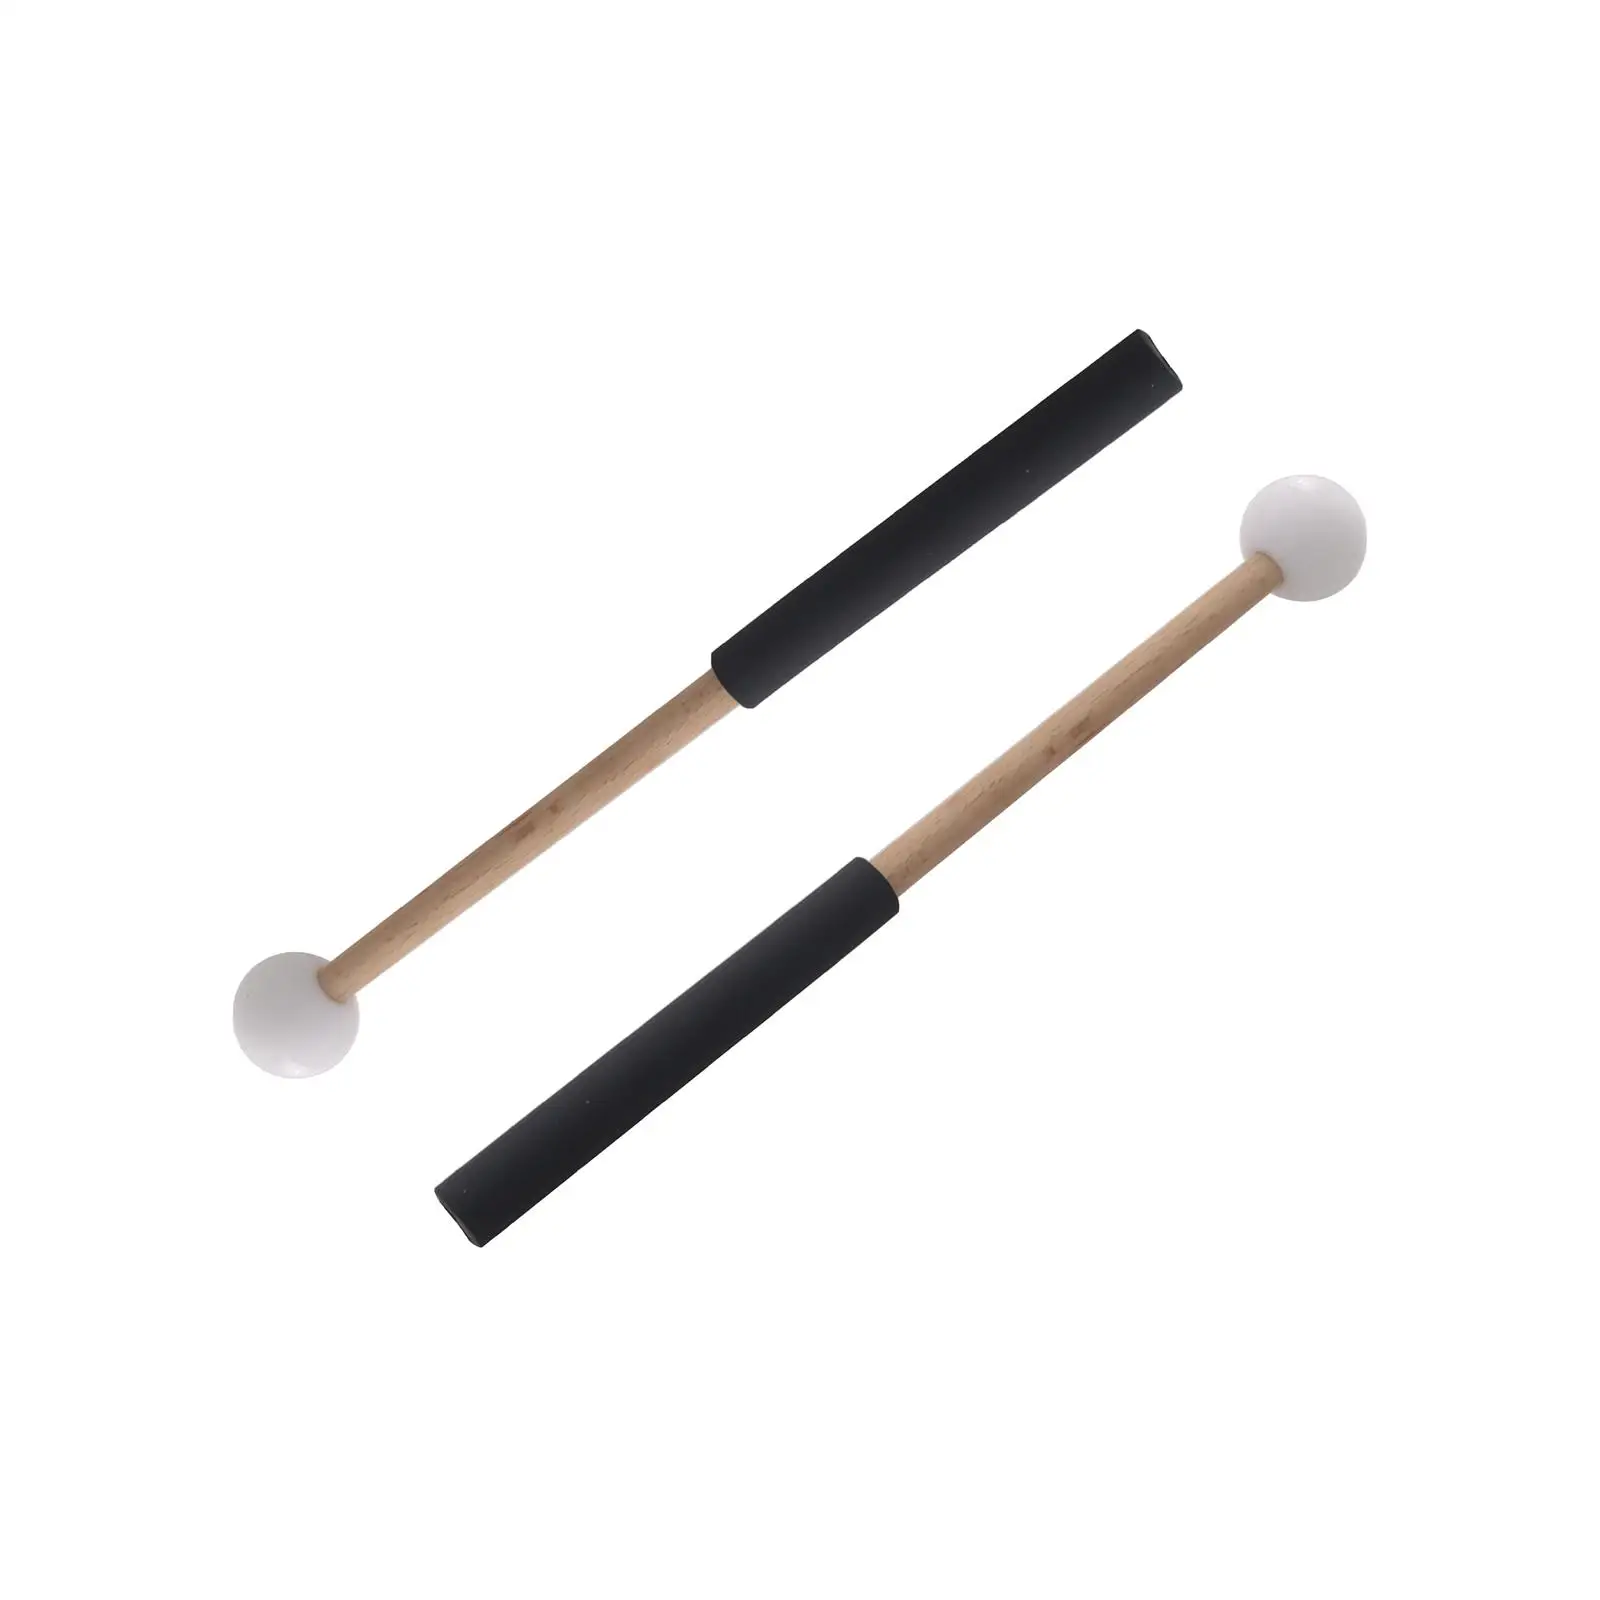 2x Drum Mallet 8.6inch Multifunctional Music Instrument Accessory Wood